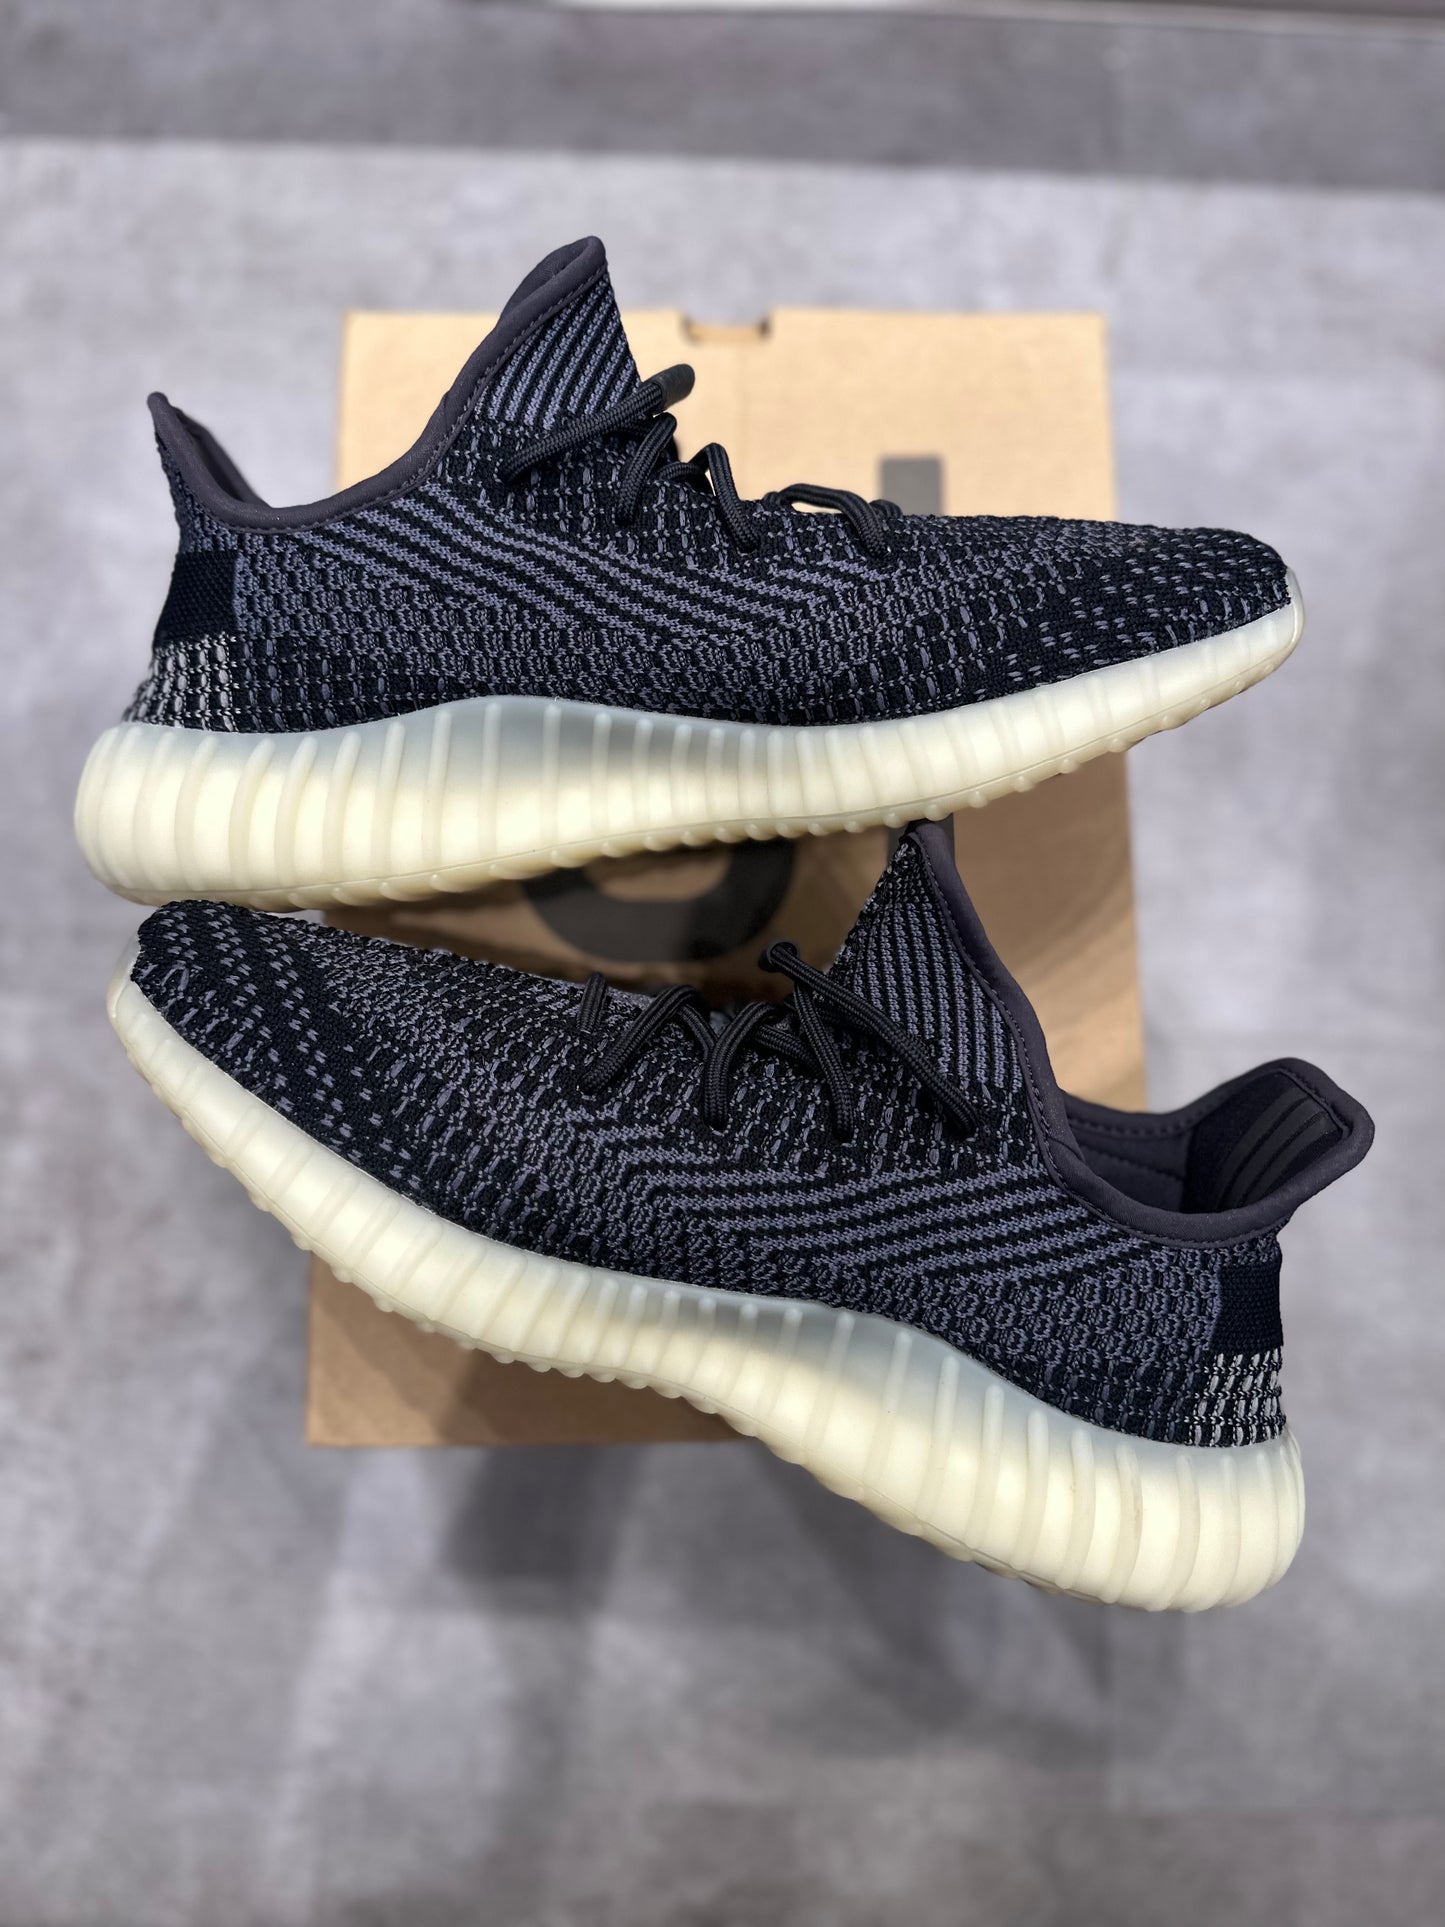 Adidas Yeezy Boost 350 V2 Carbon (Preowned)